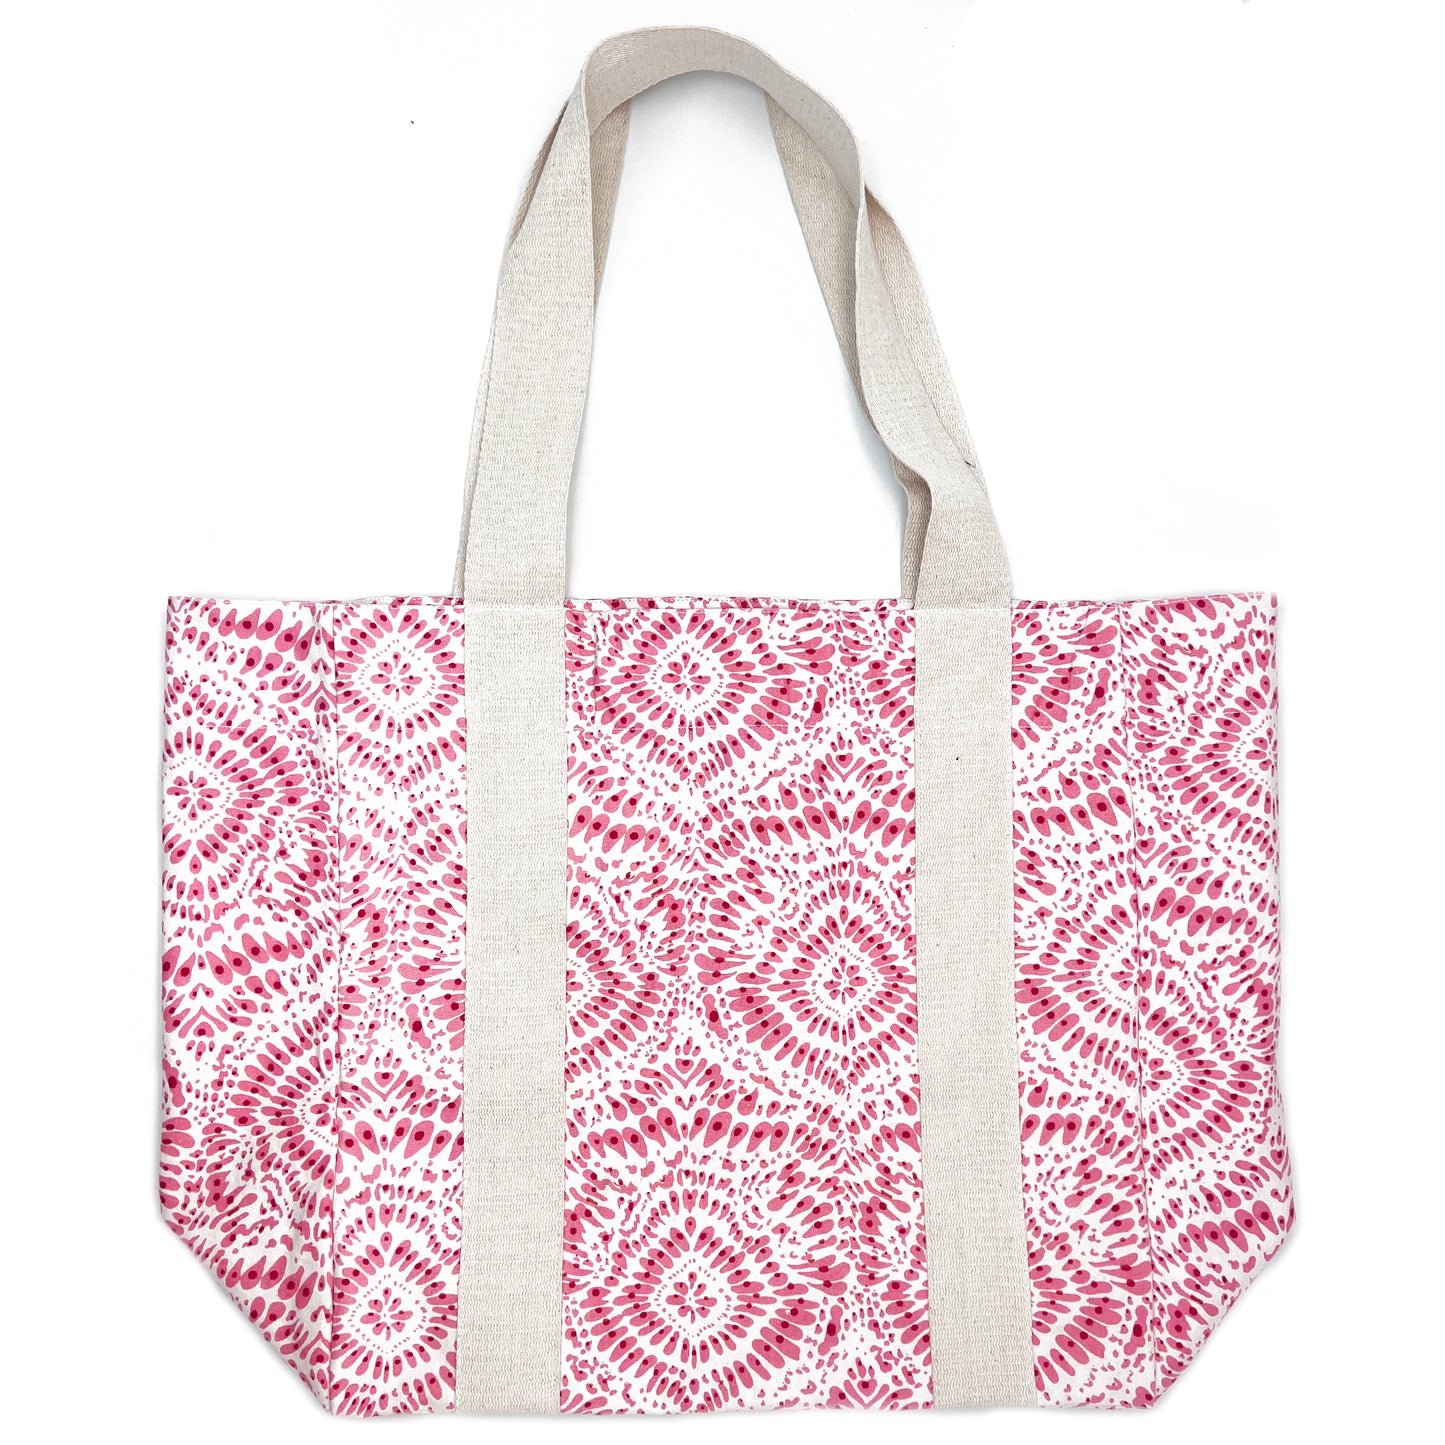 pink paradise canvas bag on a white background.